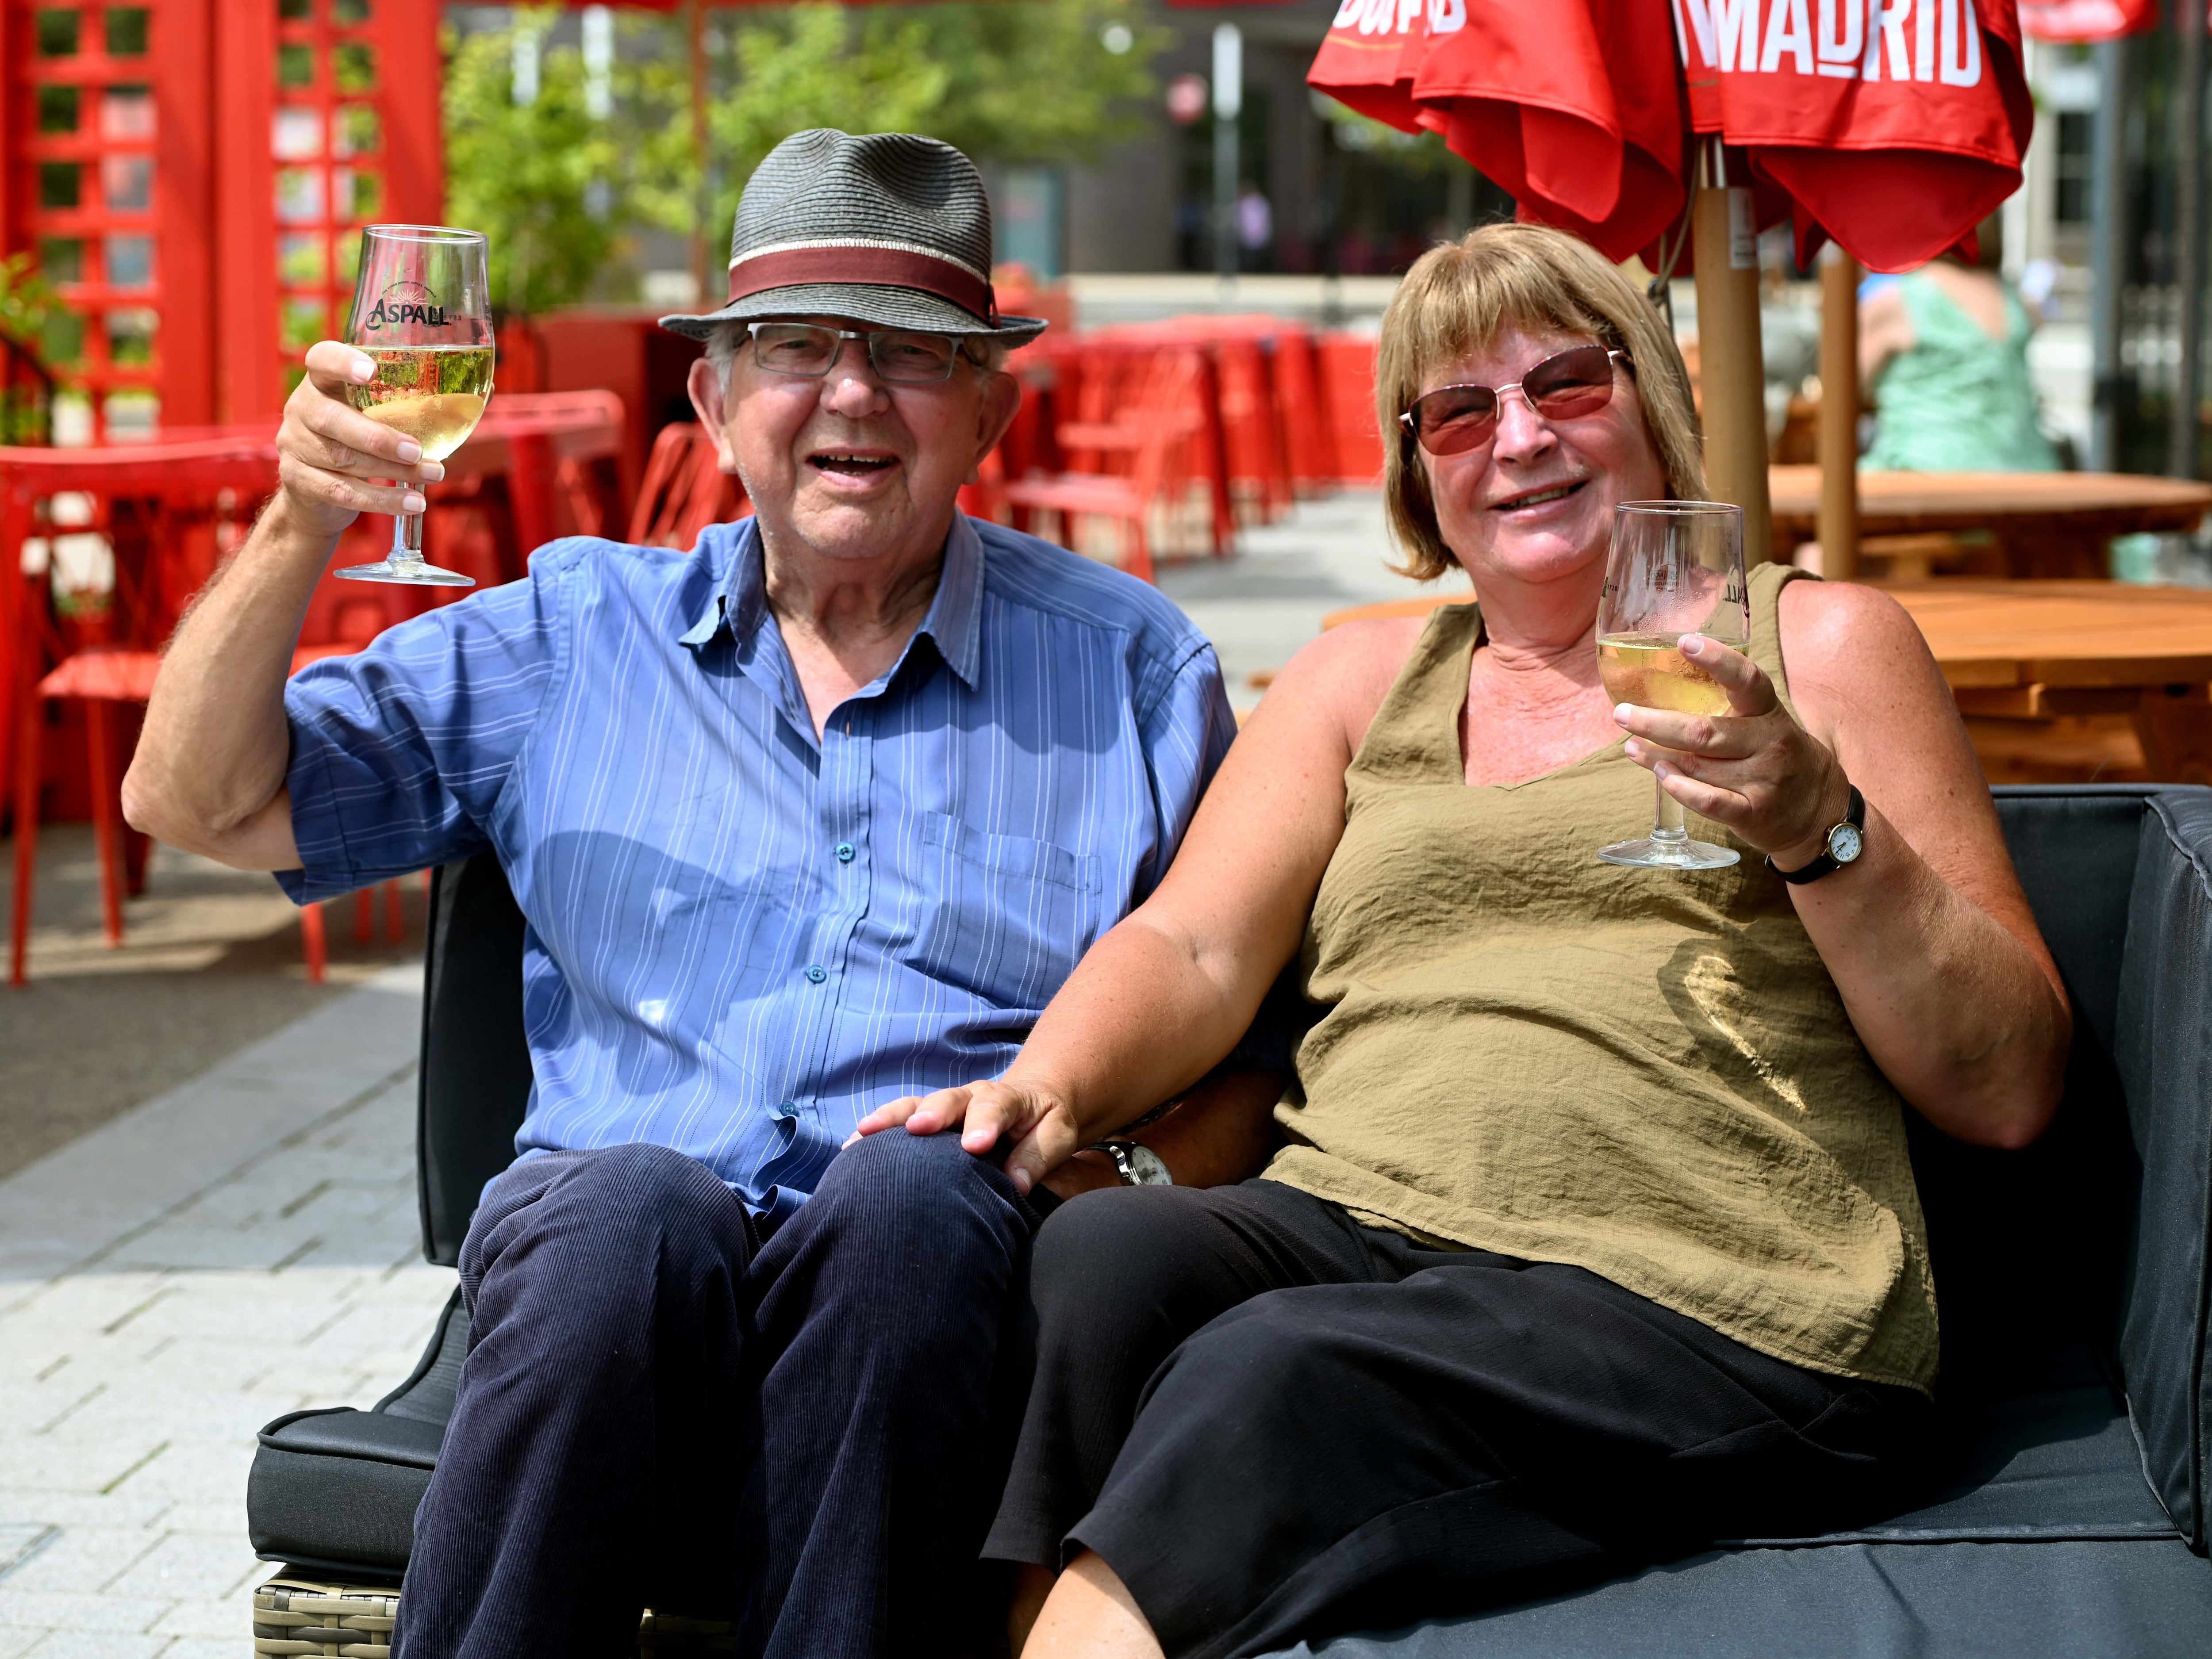 In pictures: Summer is finally here as Black Country and Shropshire residents enjoy the sun